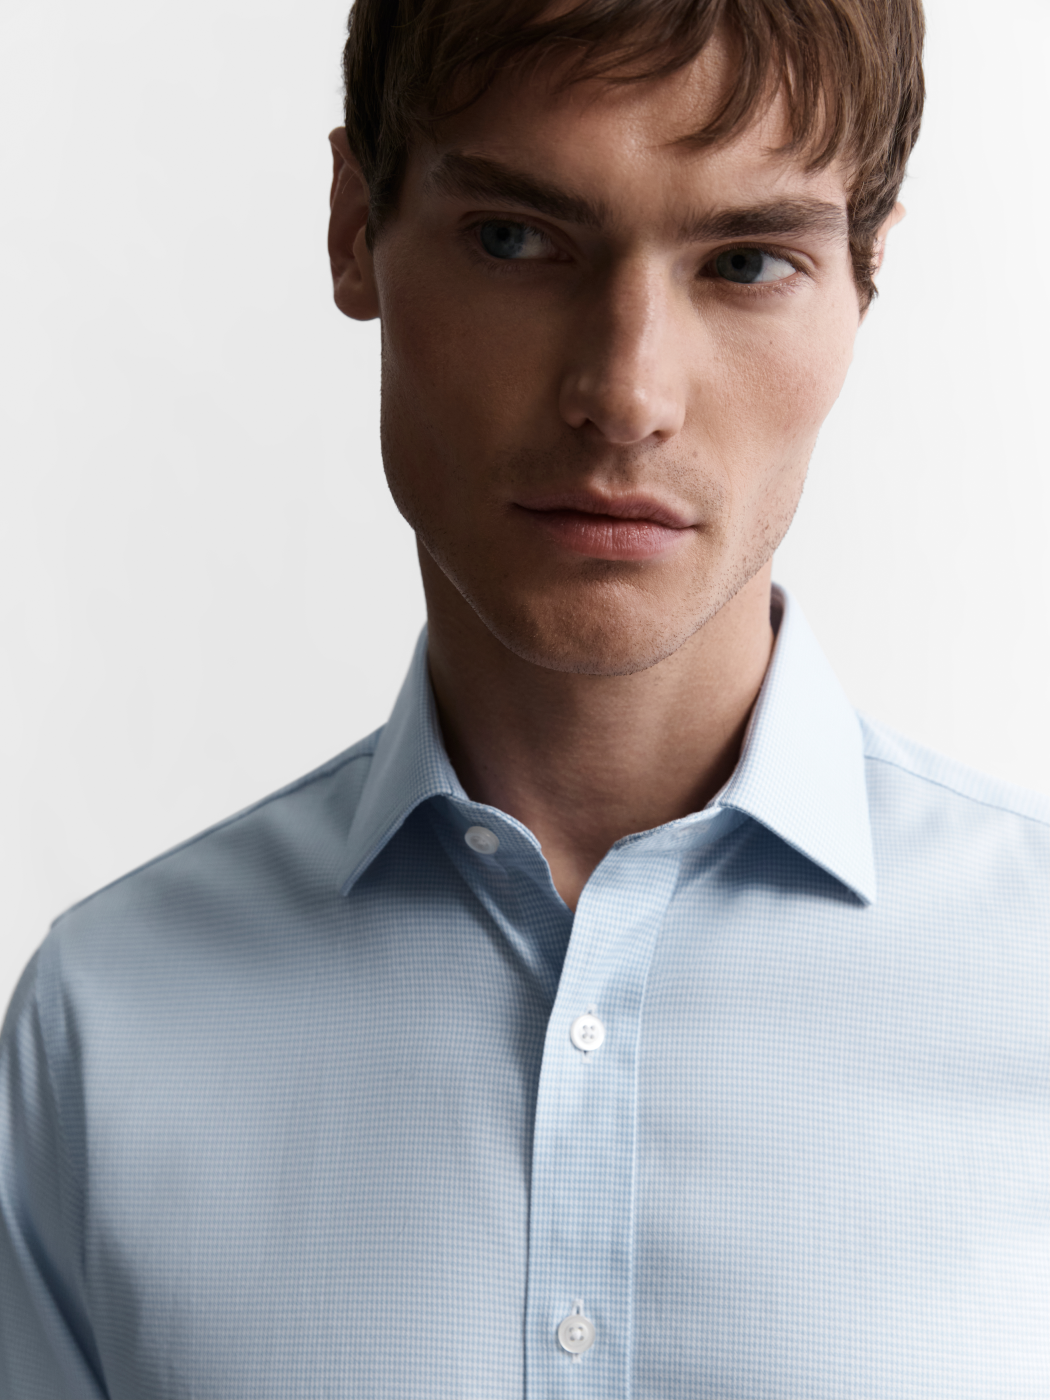 Image 2 of Non-Iron Light Blue Mini Dogtooth Plain Weave Fitted Dual Cuff Classic Collar Shirt